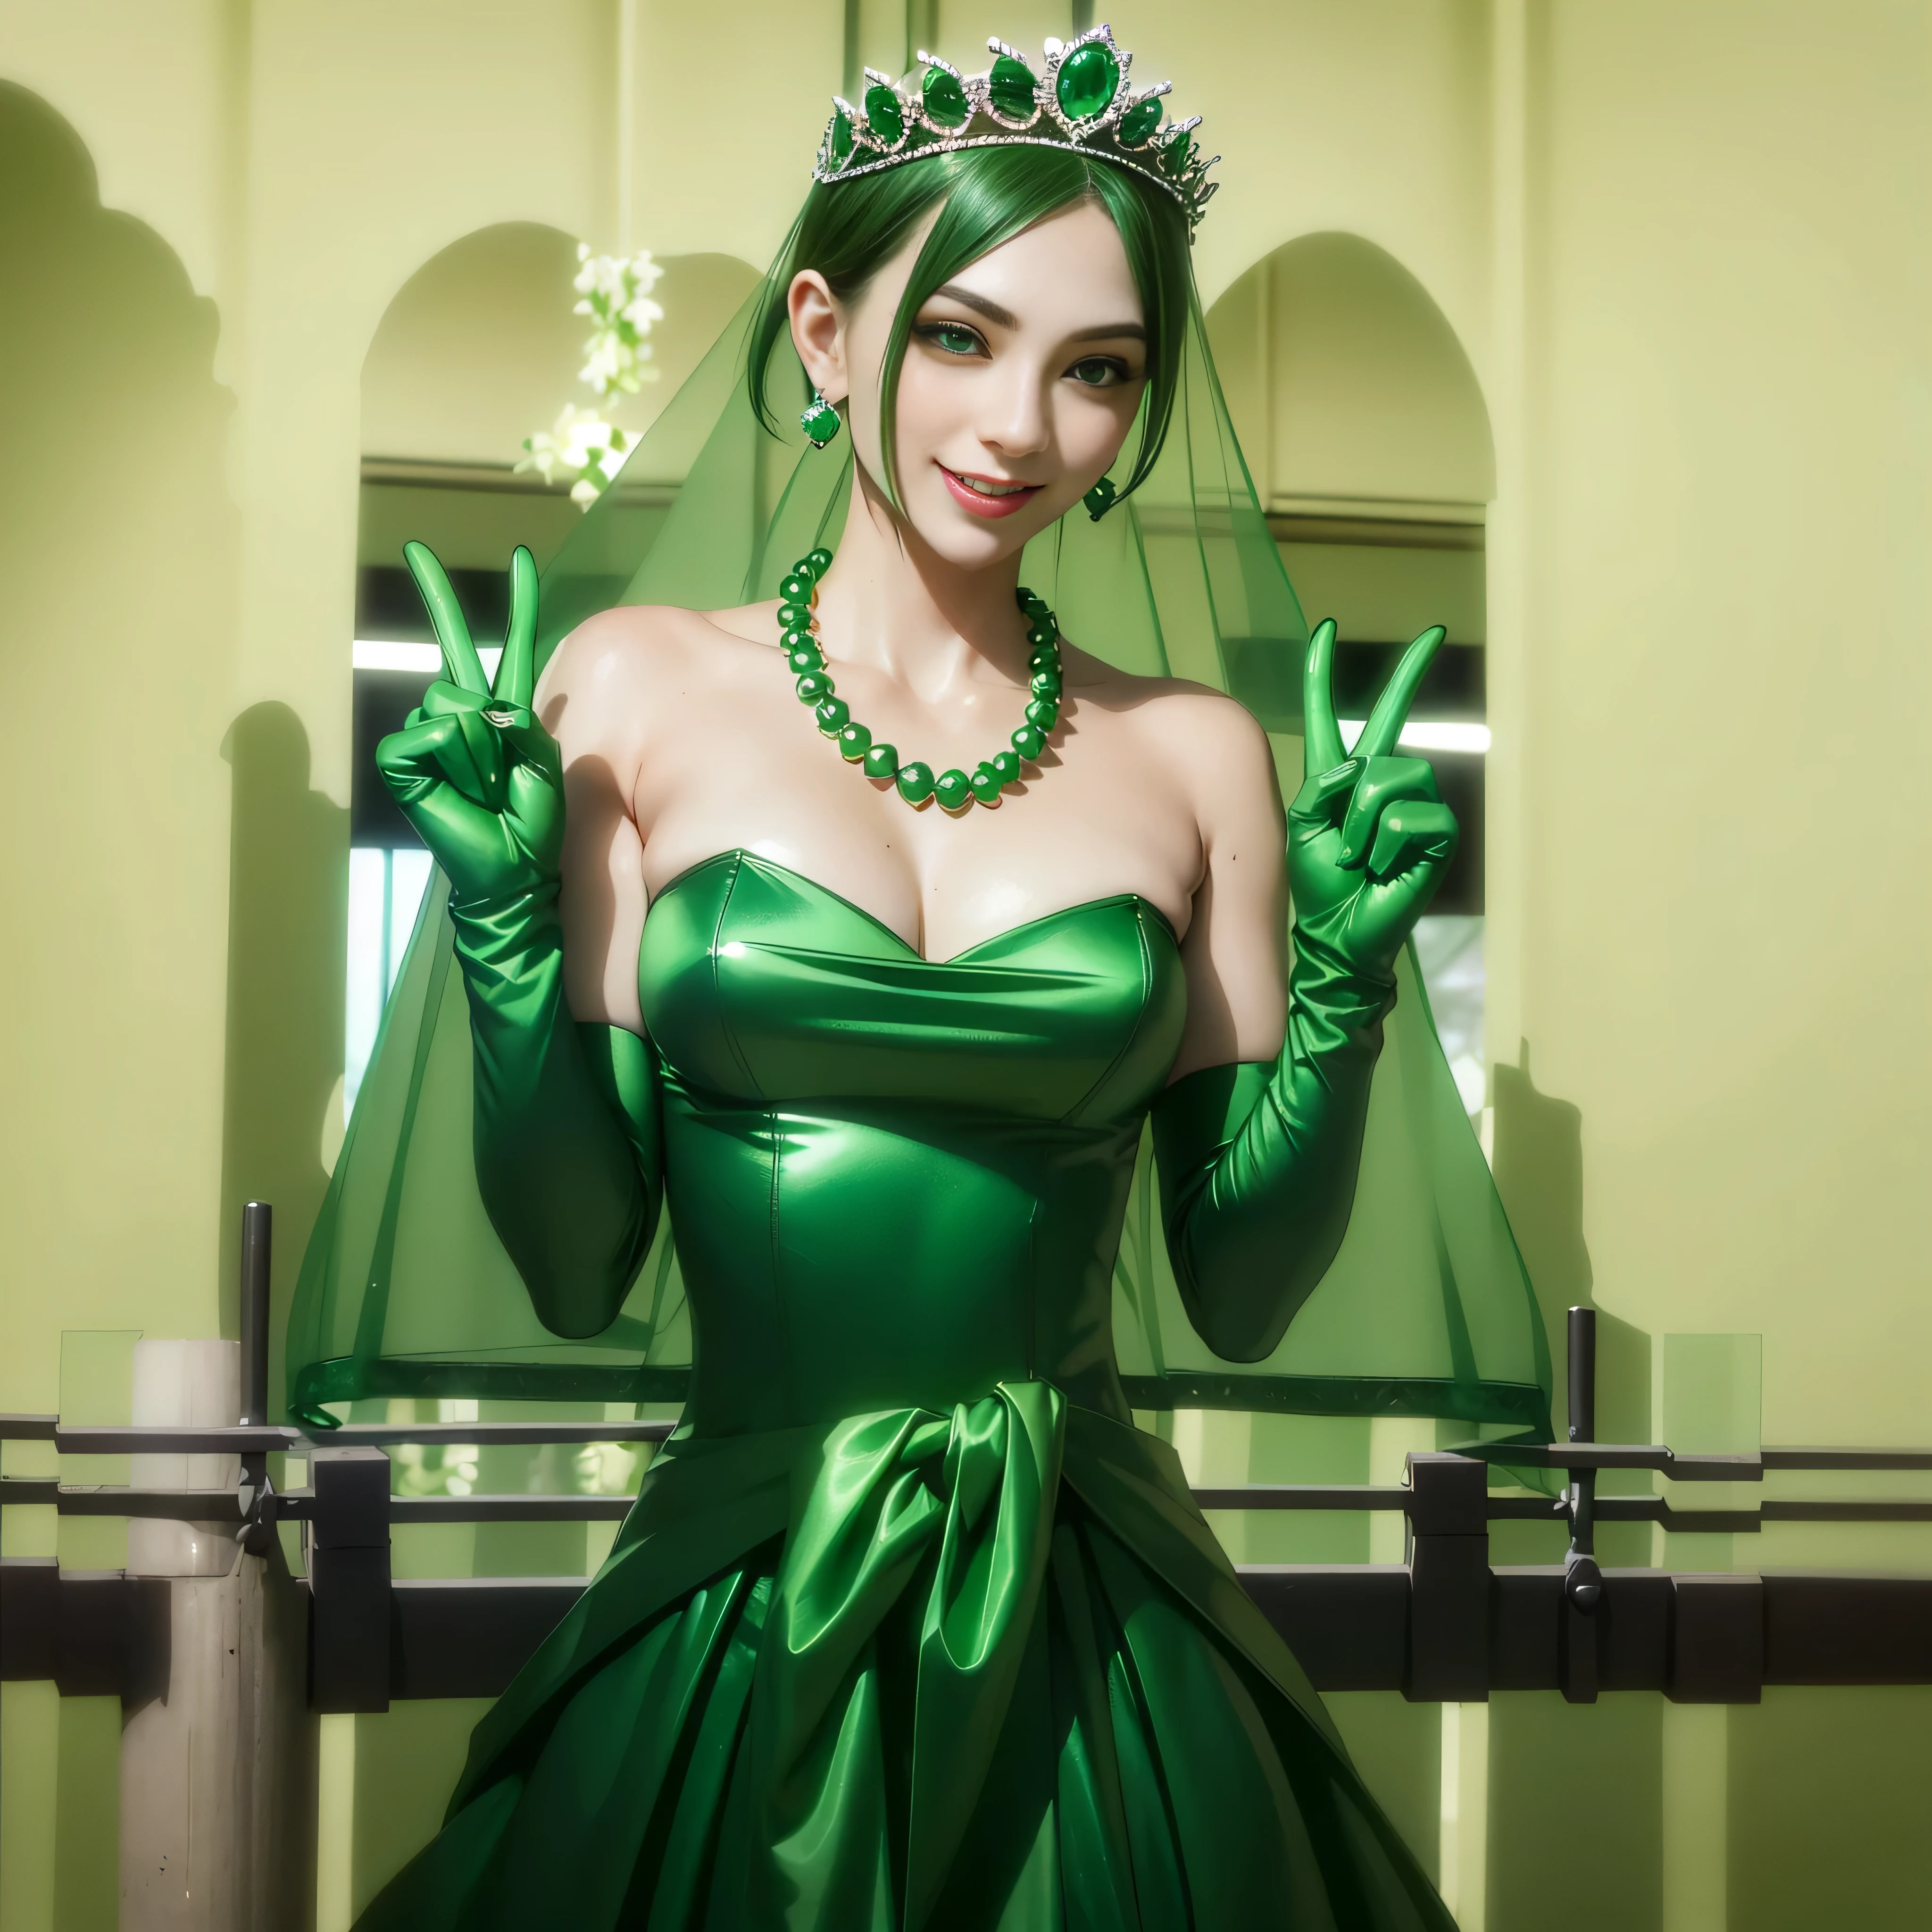 Emerald tiara, Green Pearl Necklace, Boyish very short green hair, lipstick, Smiling Japanese woman, Very short hair, Big and beautiful, Green Eyes, Long green satin gloves, Green Eyes, V sign, Emerald Earrings, Green veil, peace sign, 30-year-old female, Bride in her 30s
